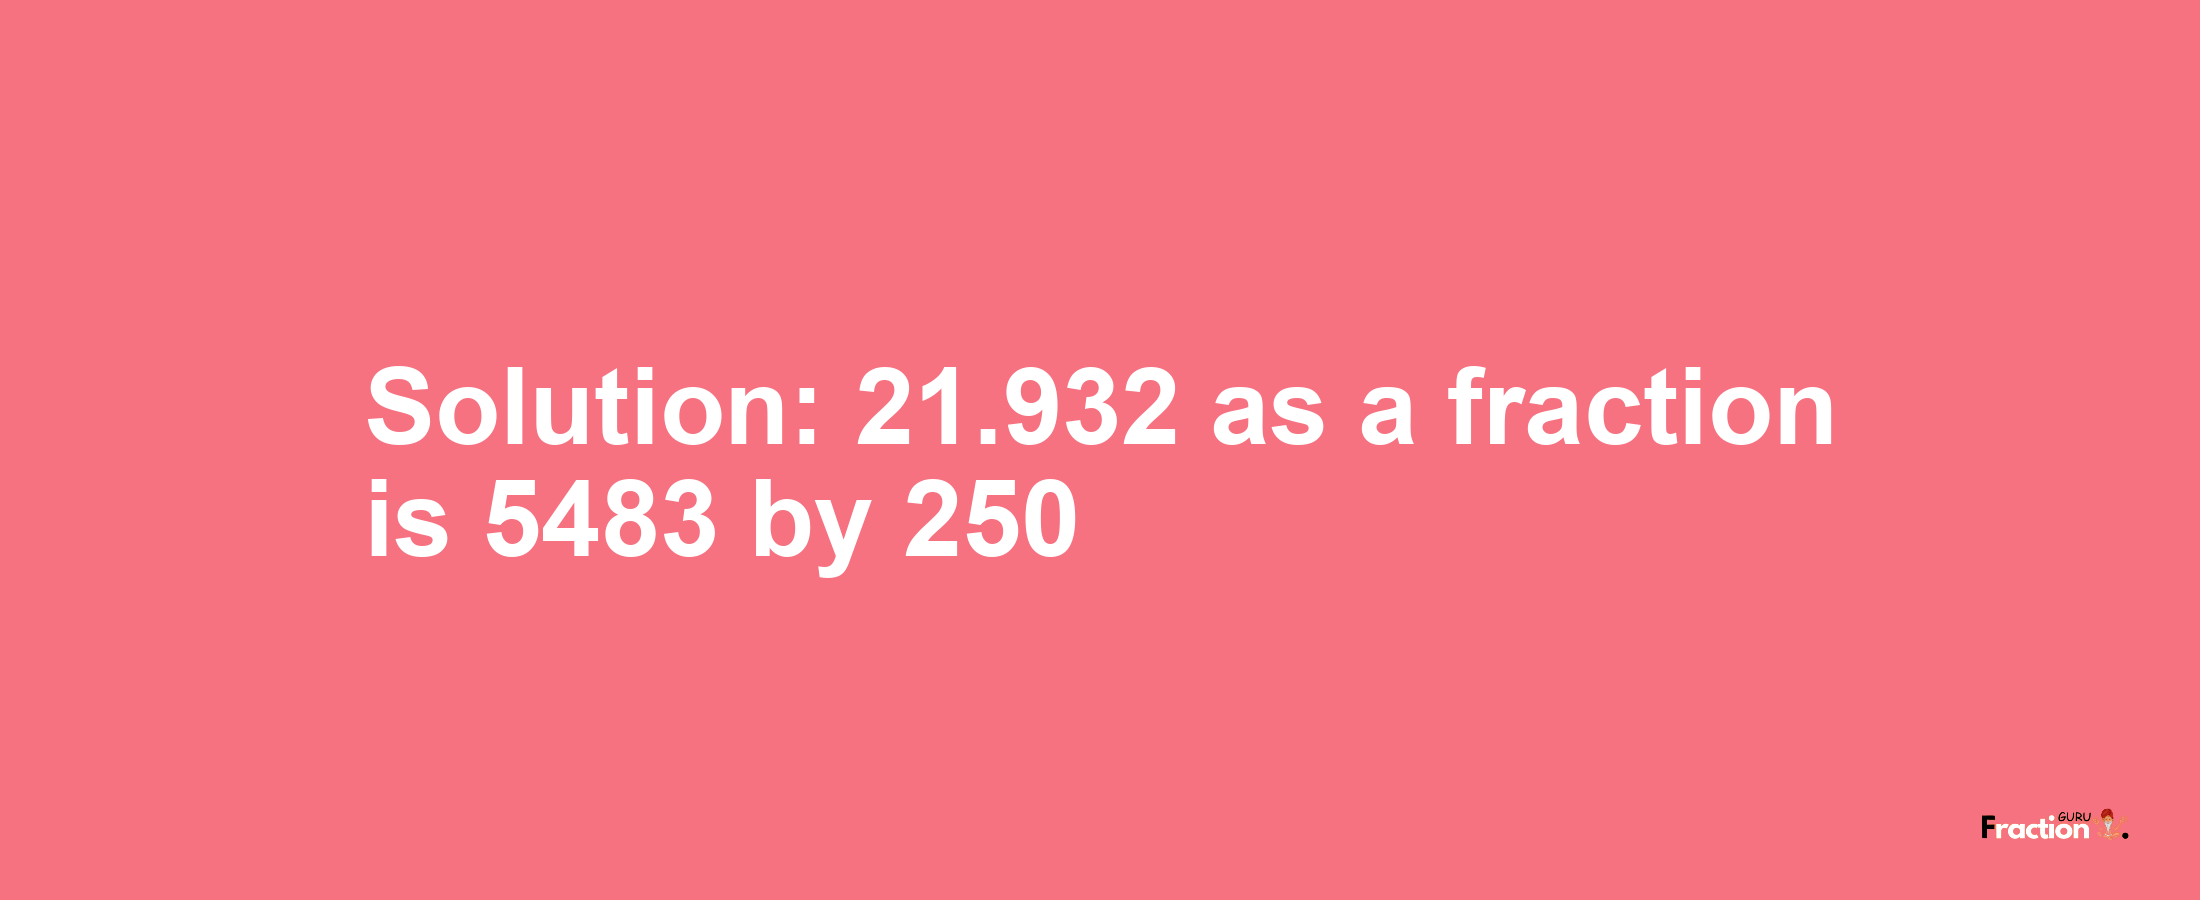 Solution:21.932 as a fraction is 5483/250